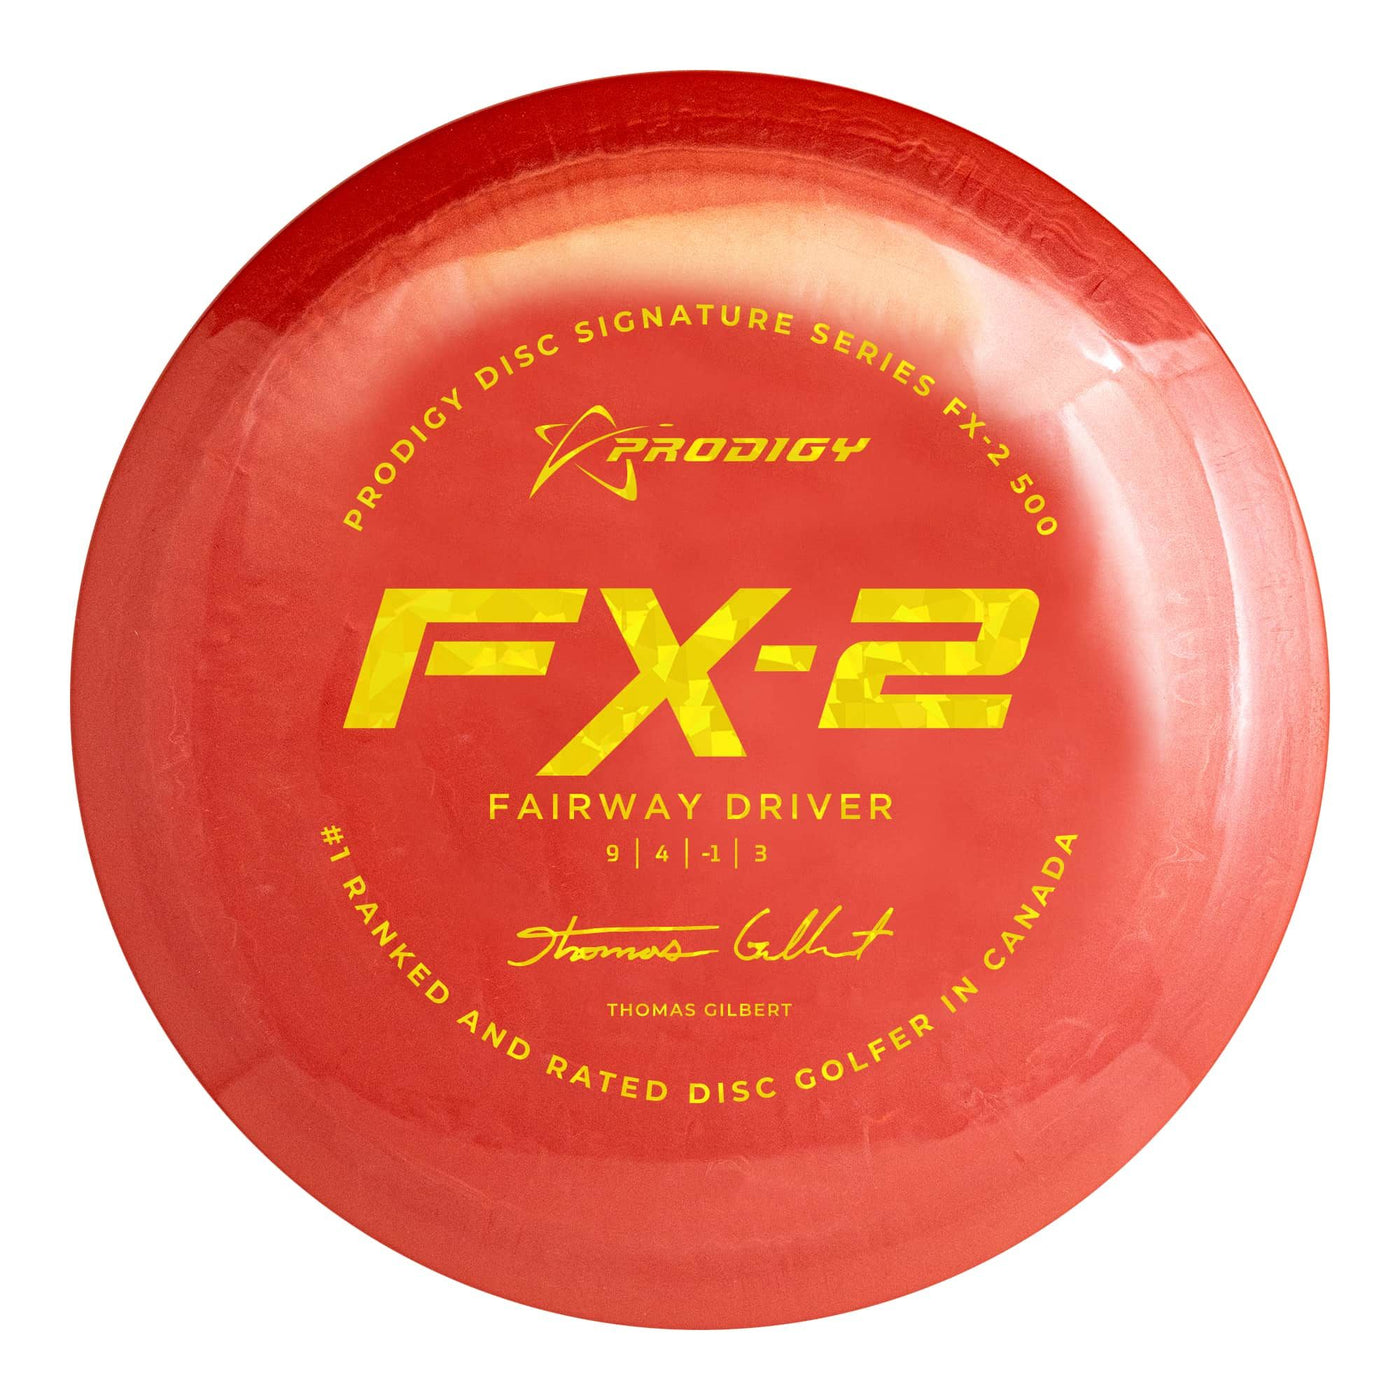 Prodigy 500 FX-2 Fairway Driver with 2022 Signature Series Thomas Gilbert - #1 Ranked and Rated Disc Golfer In Canada Stamp - Speed 9